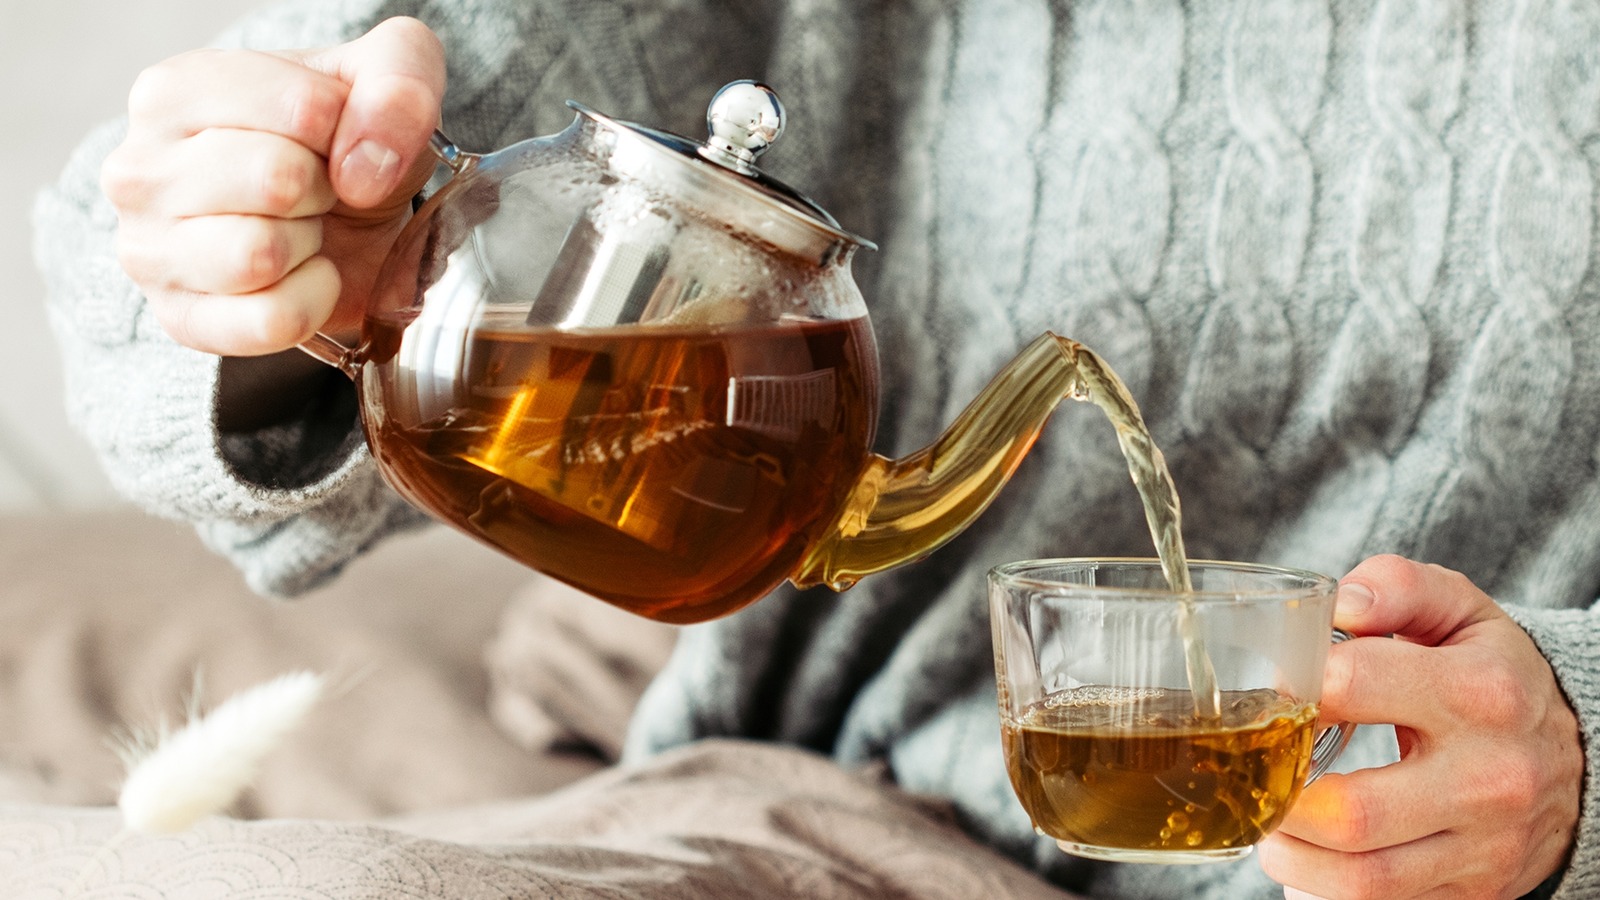 https://www.tastingtable.com/img/gallery/15-best-teapots-and-kettles-to-brew-the-perfect-cup/l-intro-1694034063.jpg